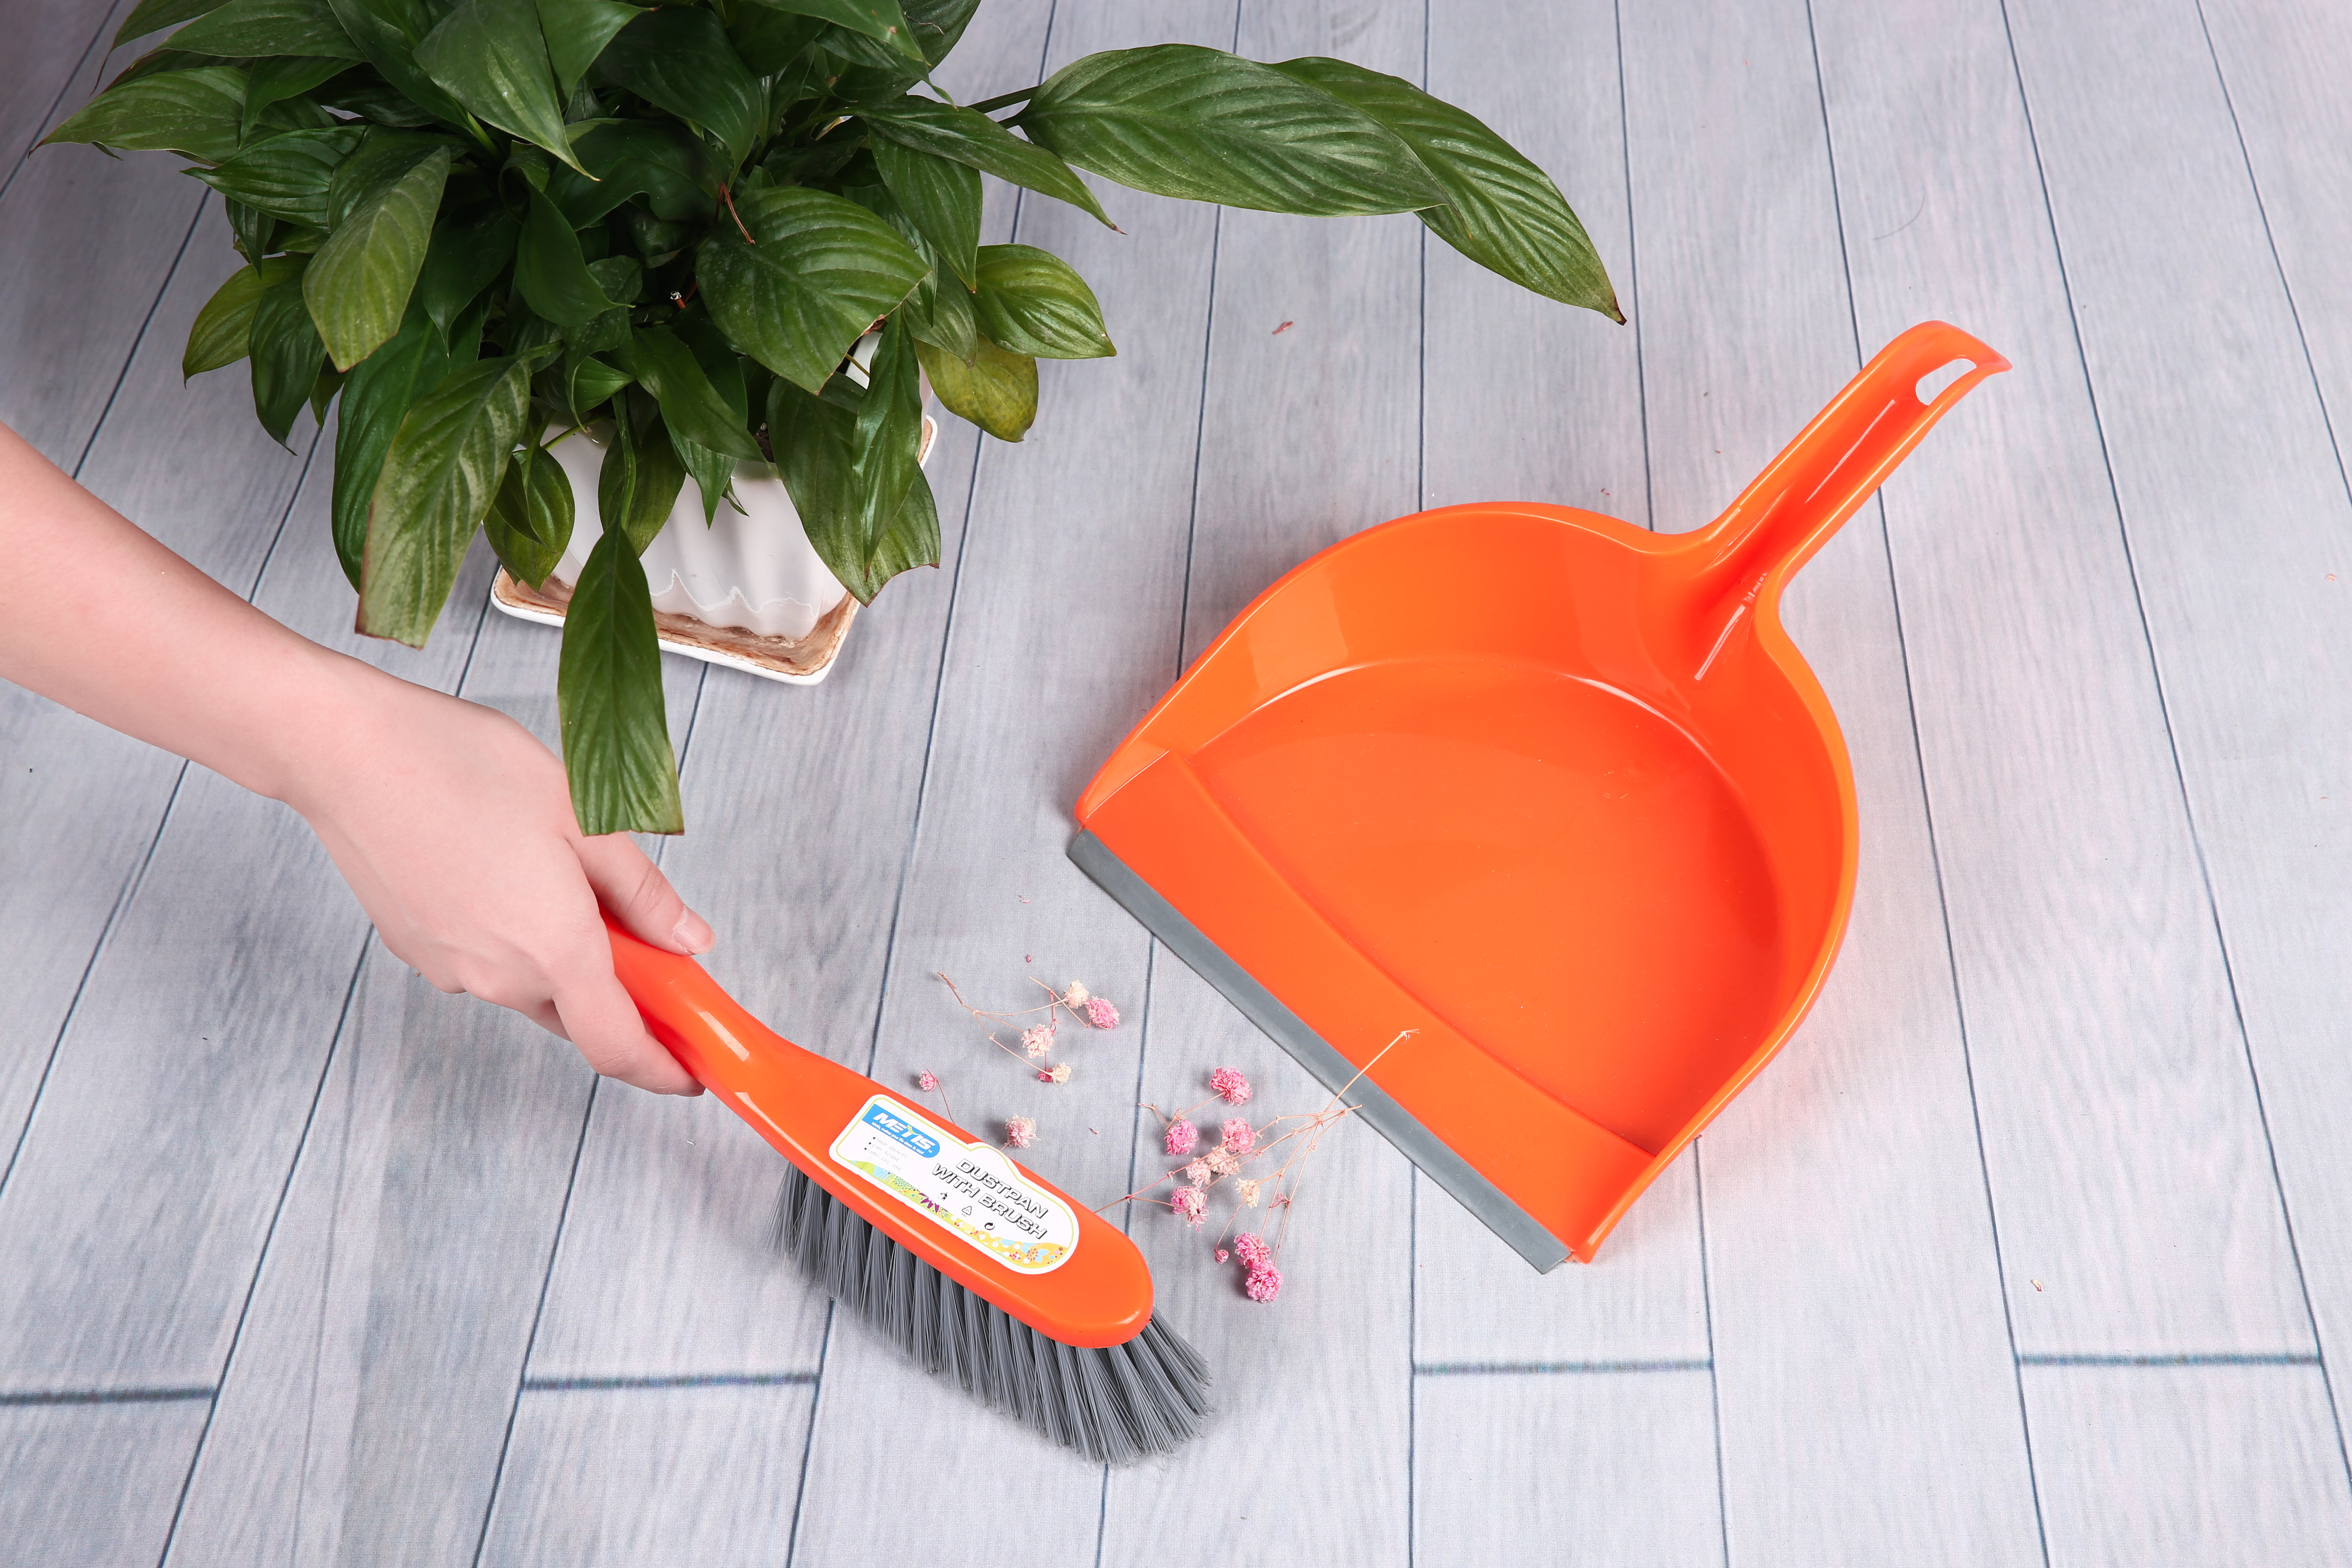 High Quality Cleaning Dustpan With Brush For Home Cleaning Use